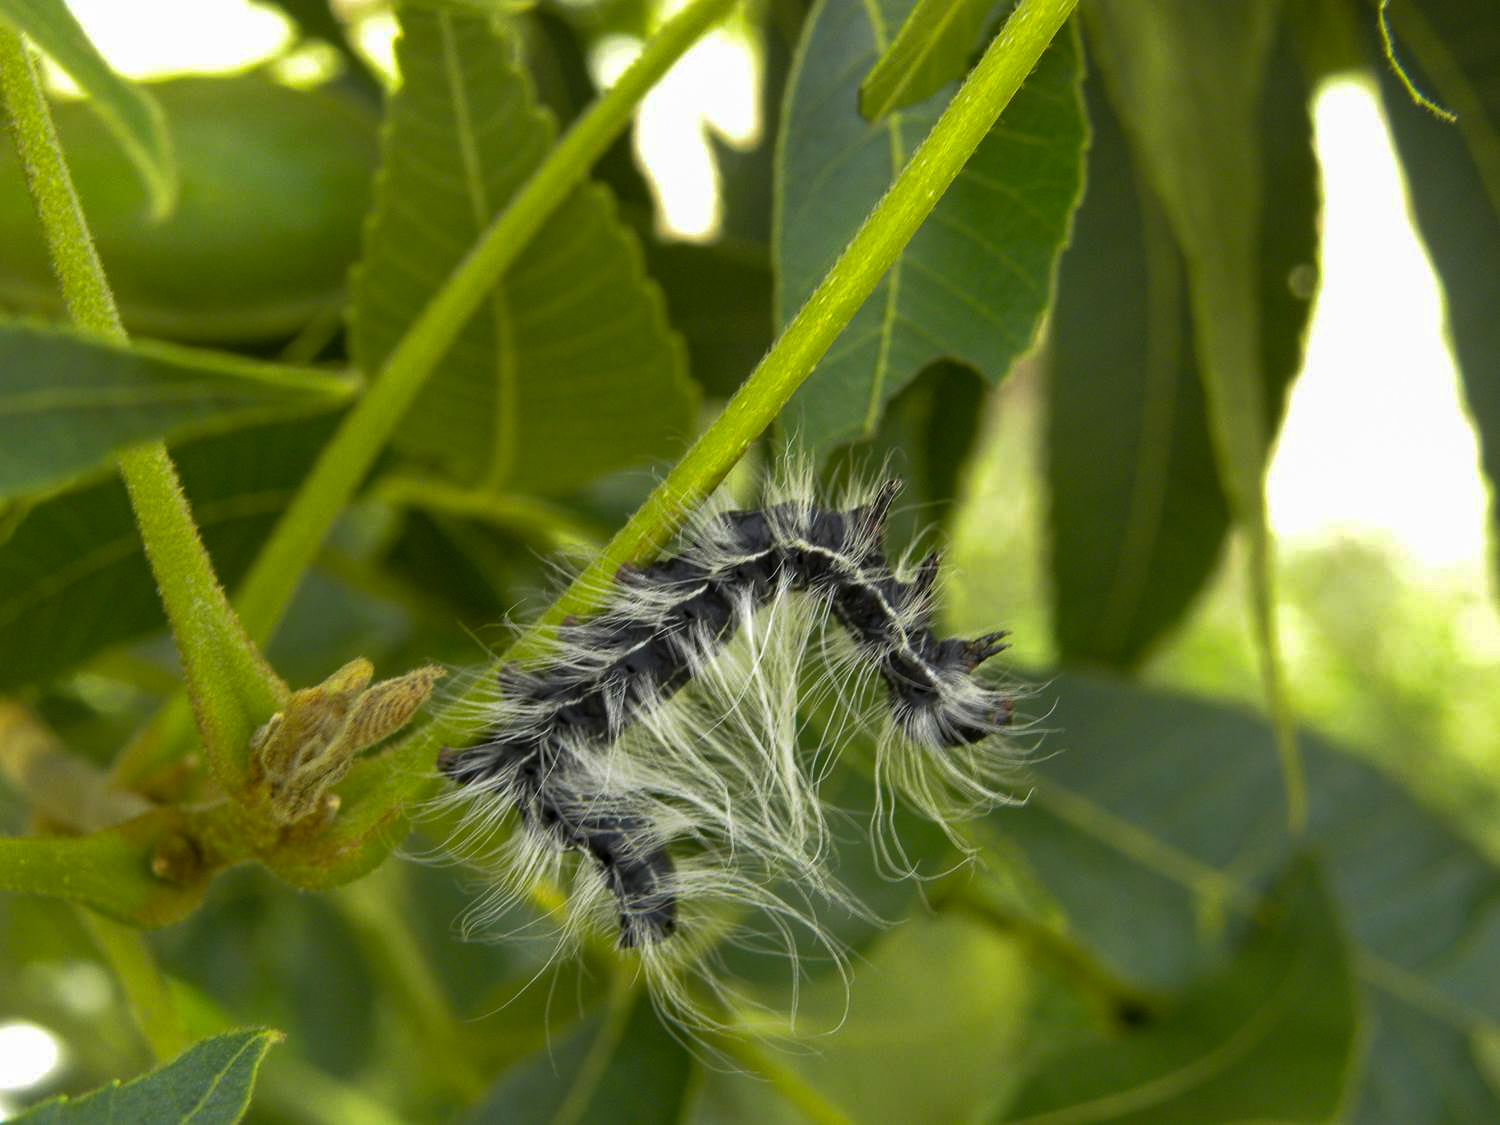 A black caterpillar with fine white hairs is the fifth instar of the walnut caterpillar. This one crawls along a leaf stem. If left alone, it will quickly defoliate the entire branch.